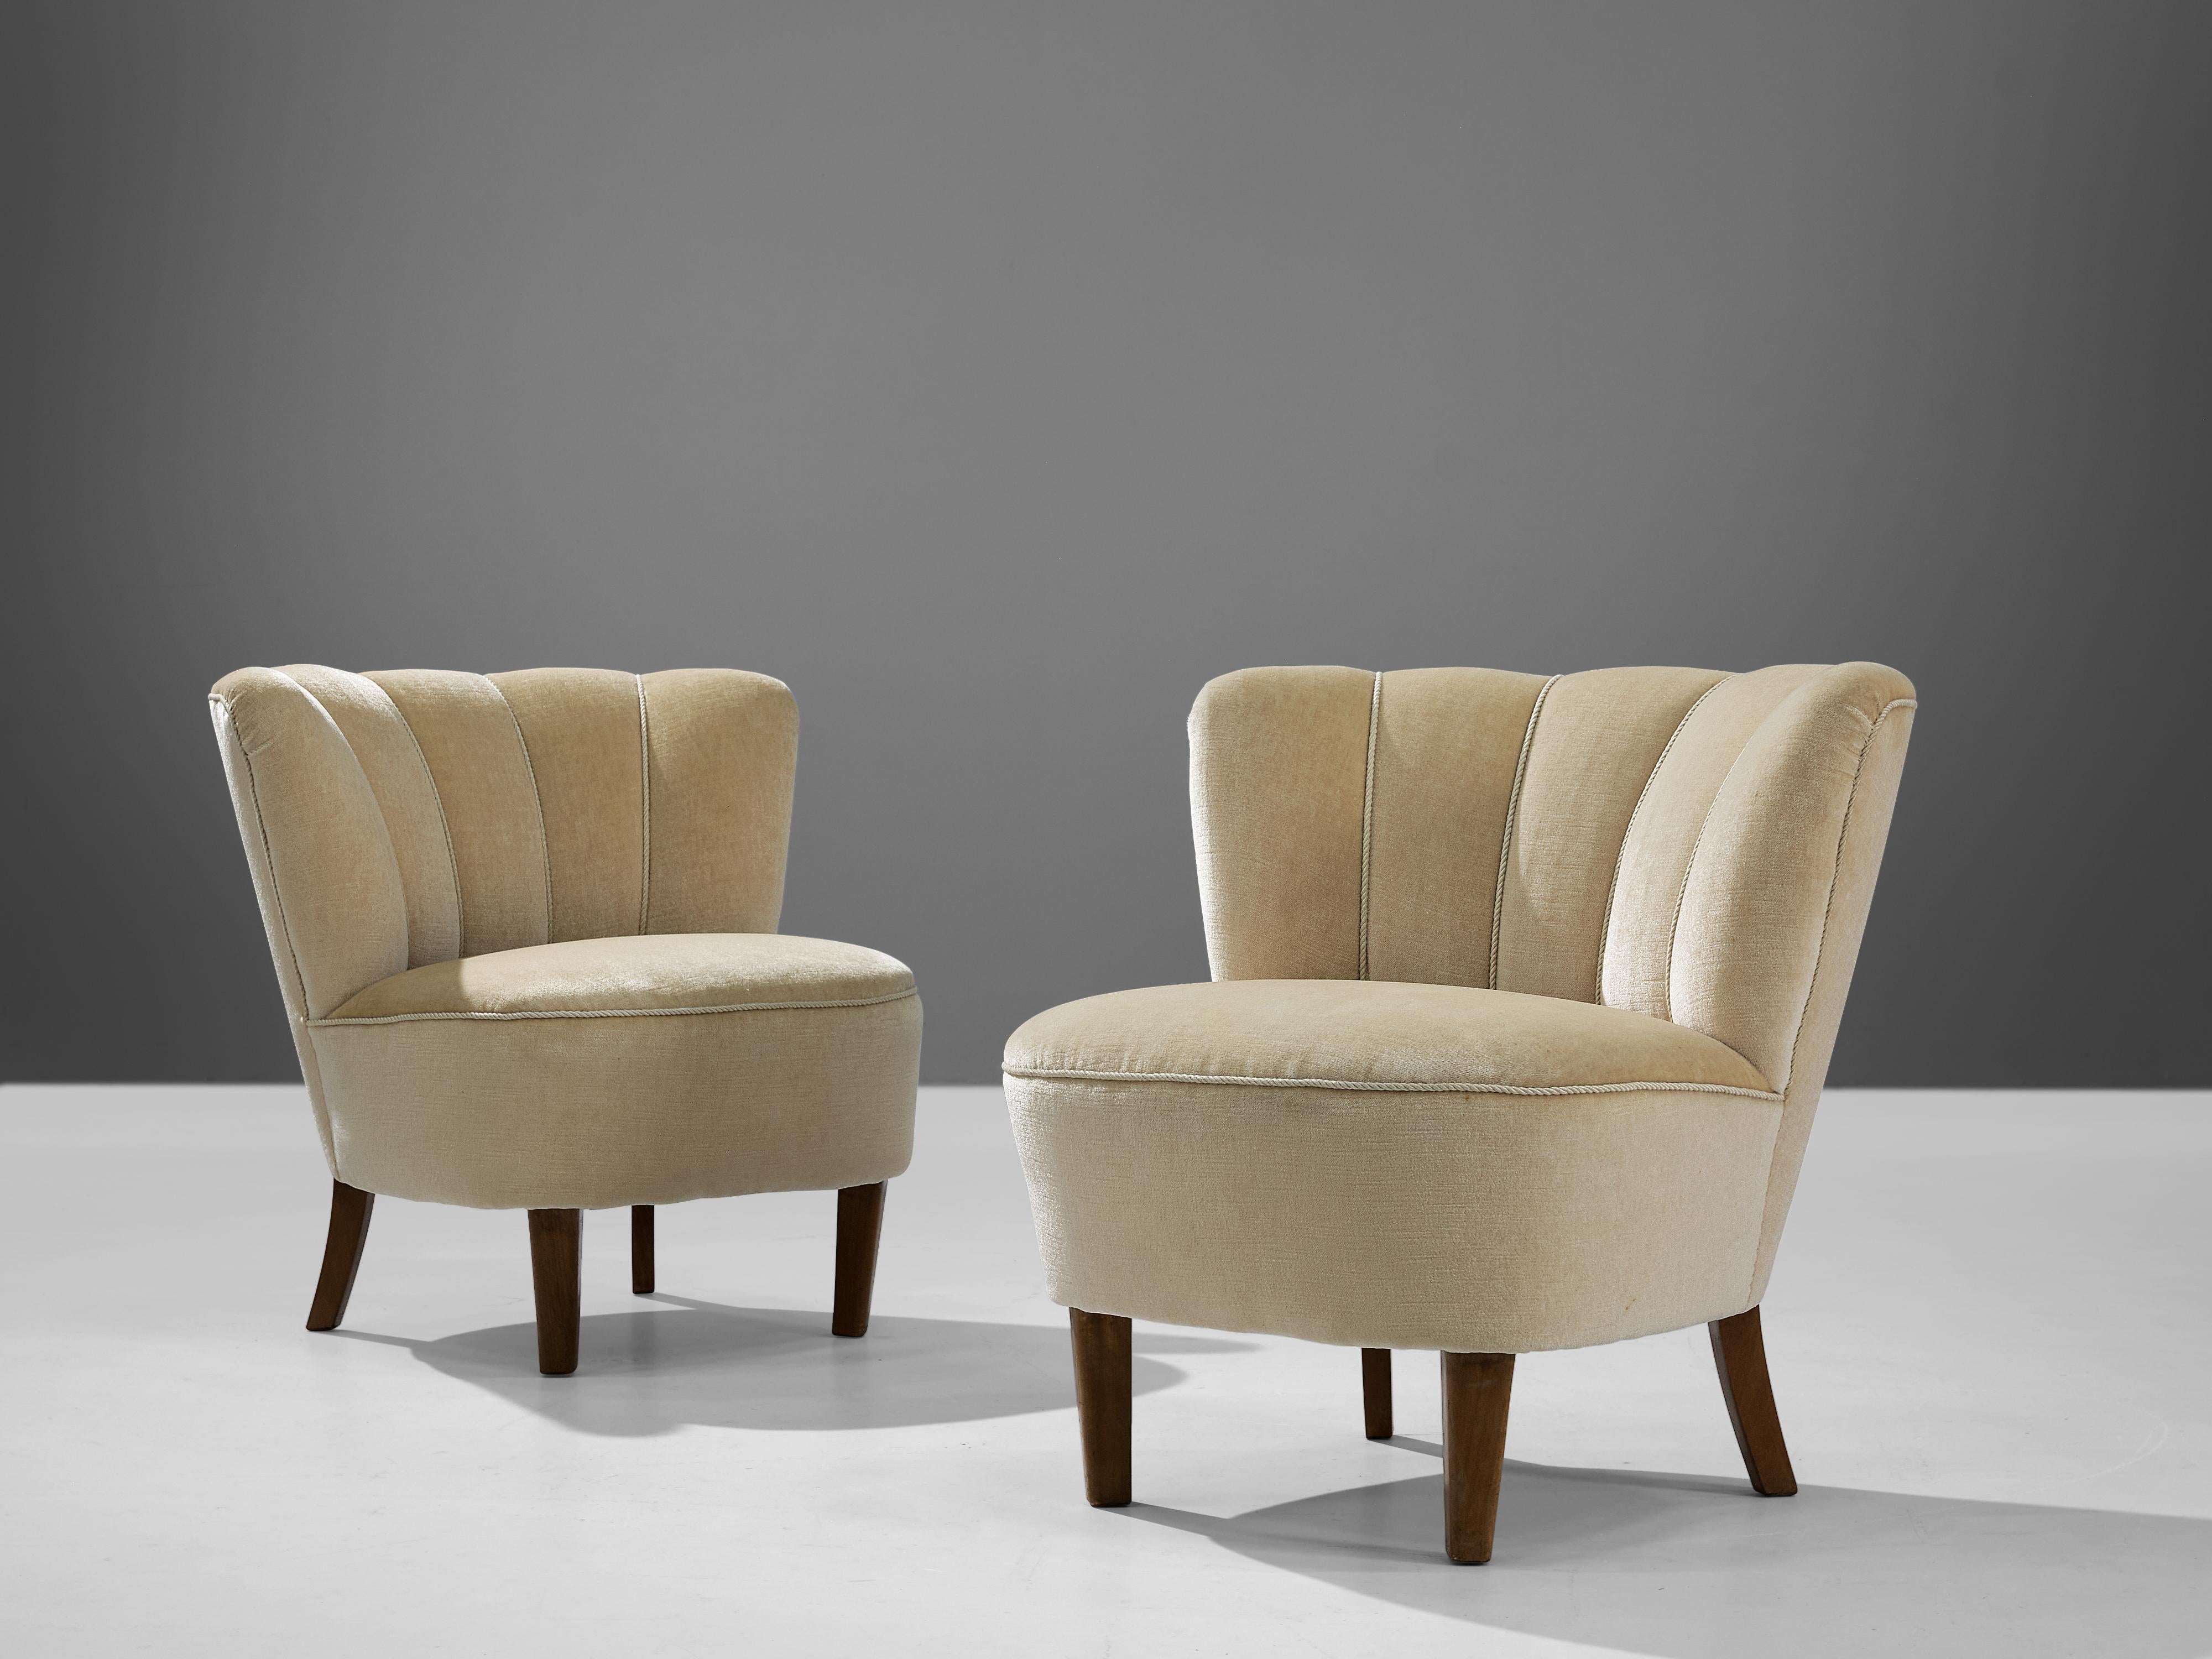 Lounge chair, velvet, beech, Italy, 1940s

Comfortable lounge chairs with rounded backrest. These chairs are currently upholstered in beige velvet which is in good condition and contributes to the lovely appearance. The curved backrest features